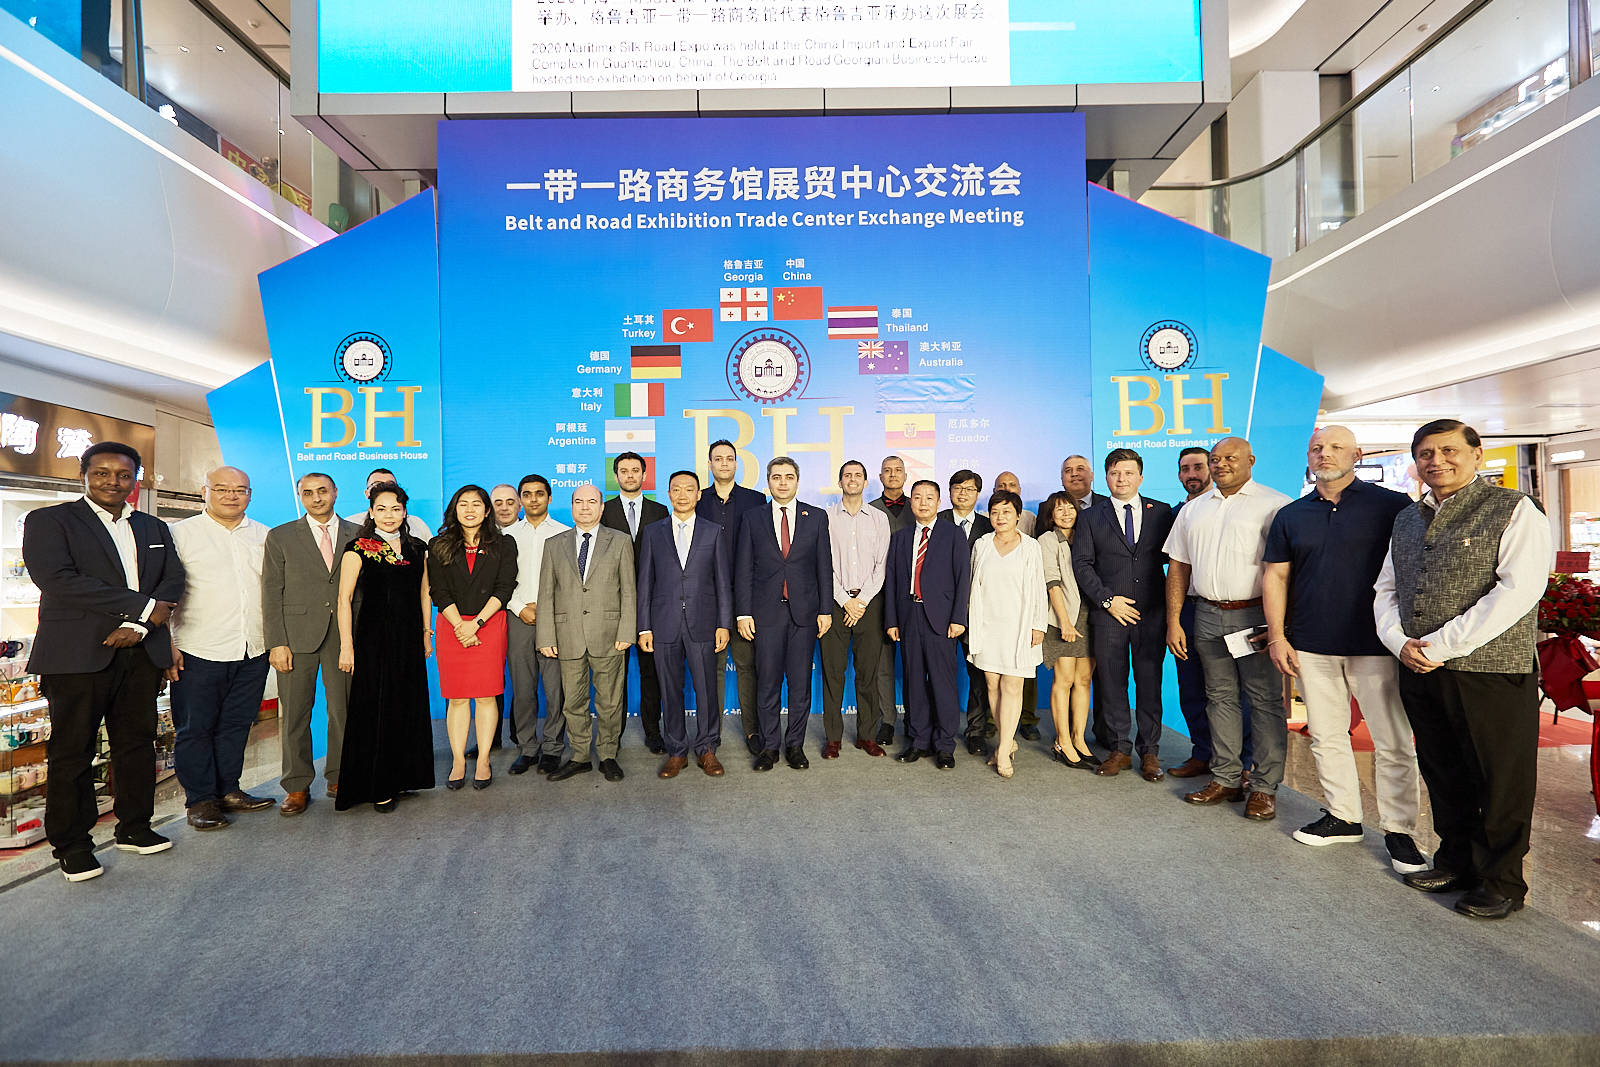 2021 one belt, one road business center exhibition and Trade Center Development and exchange conference was a success.